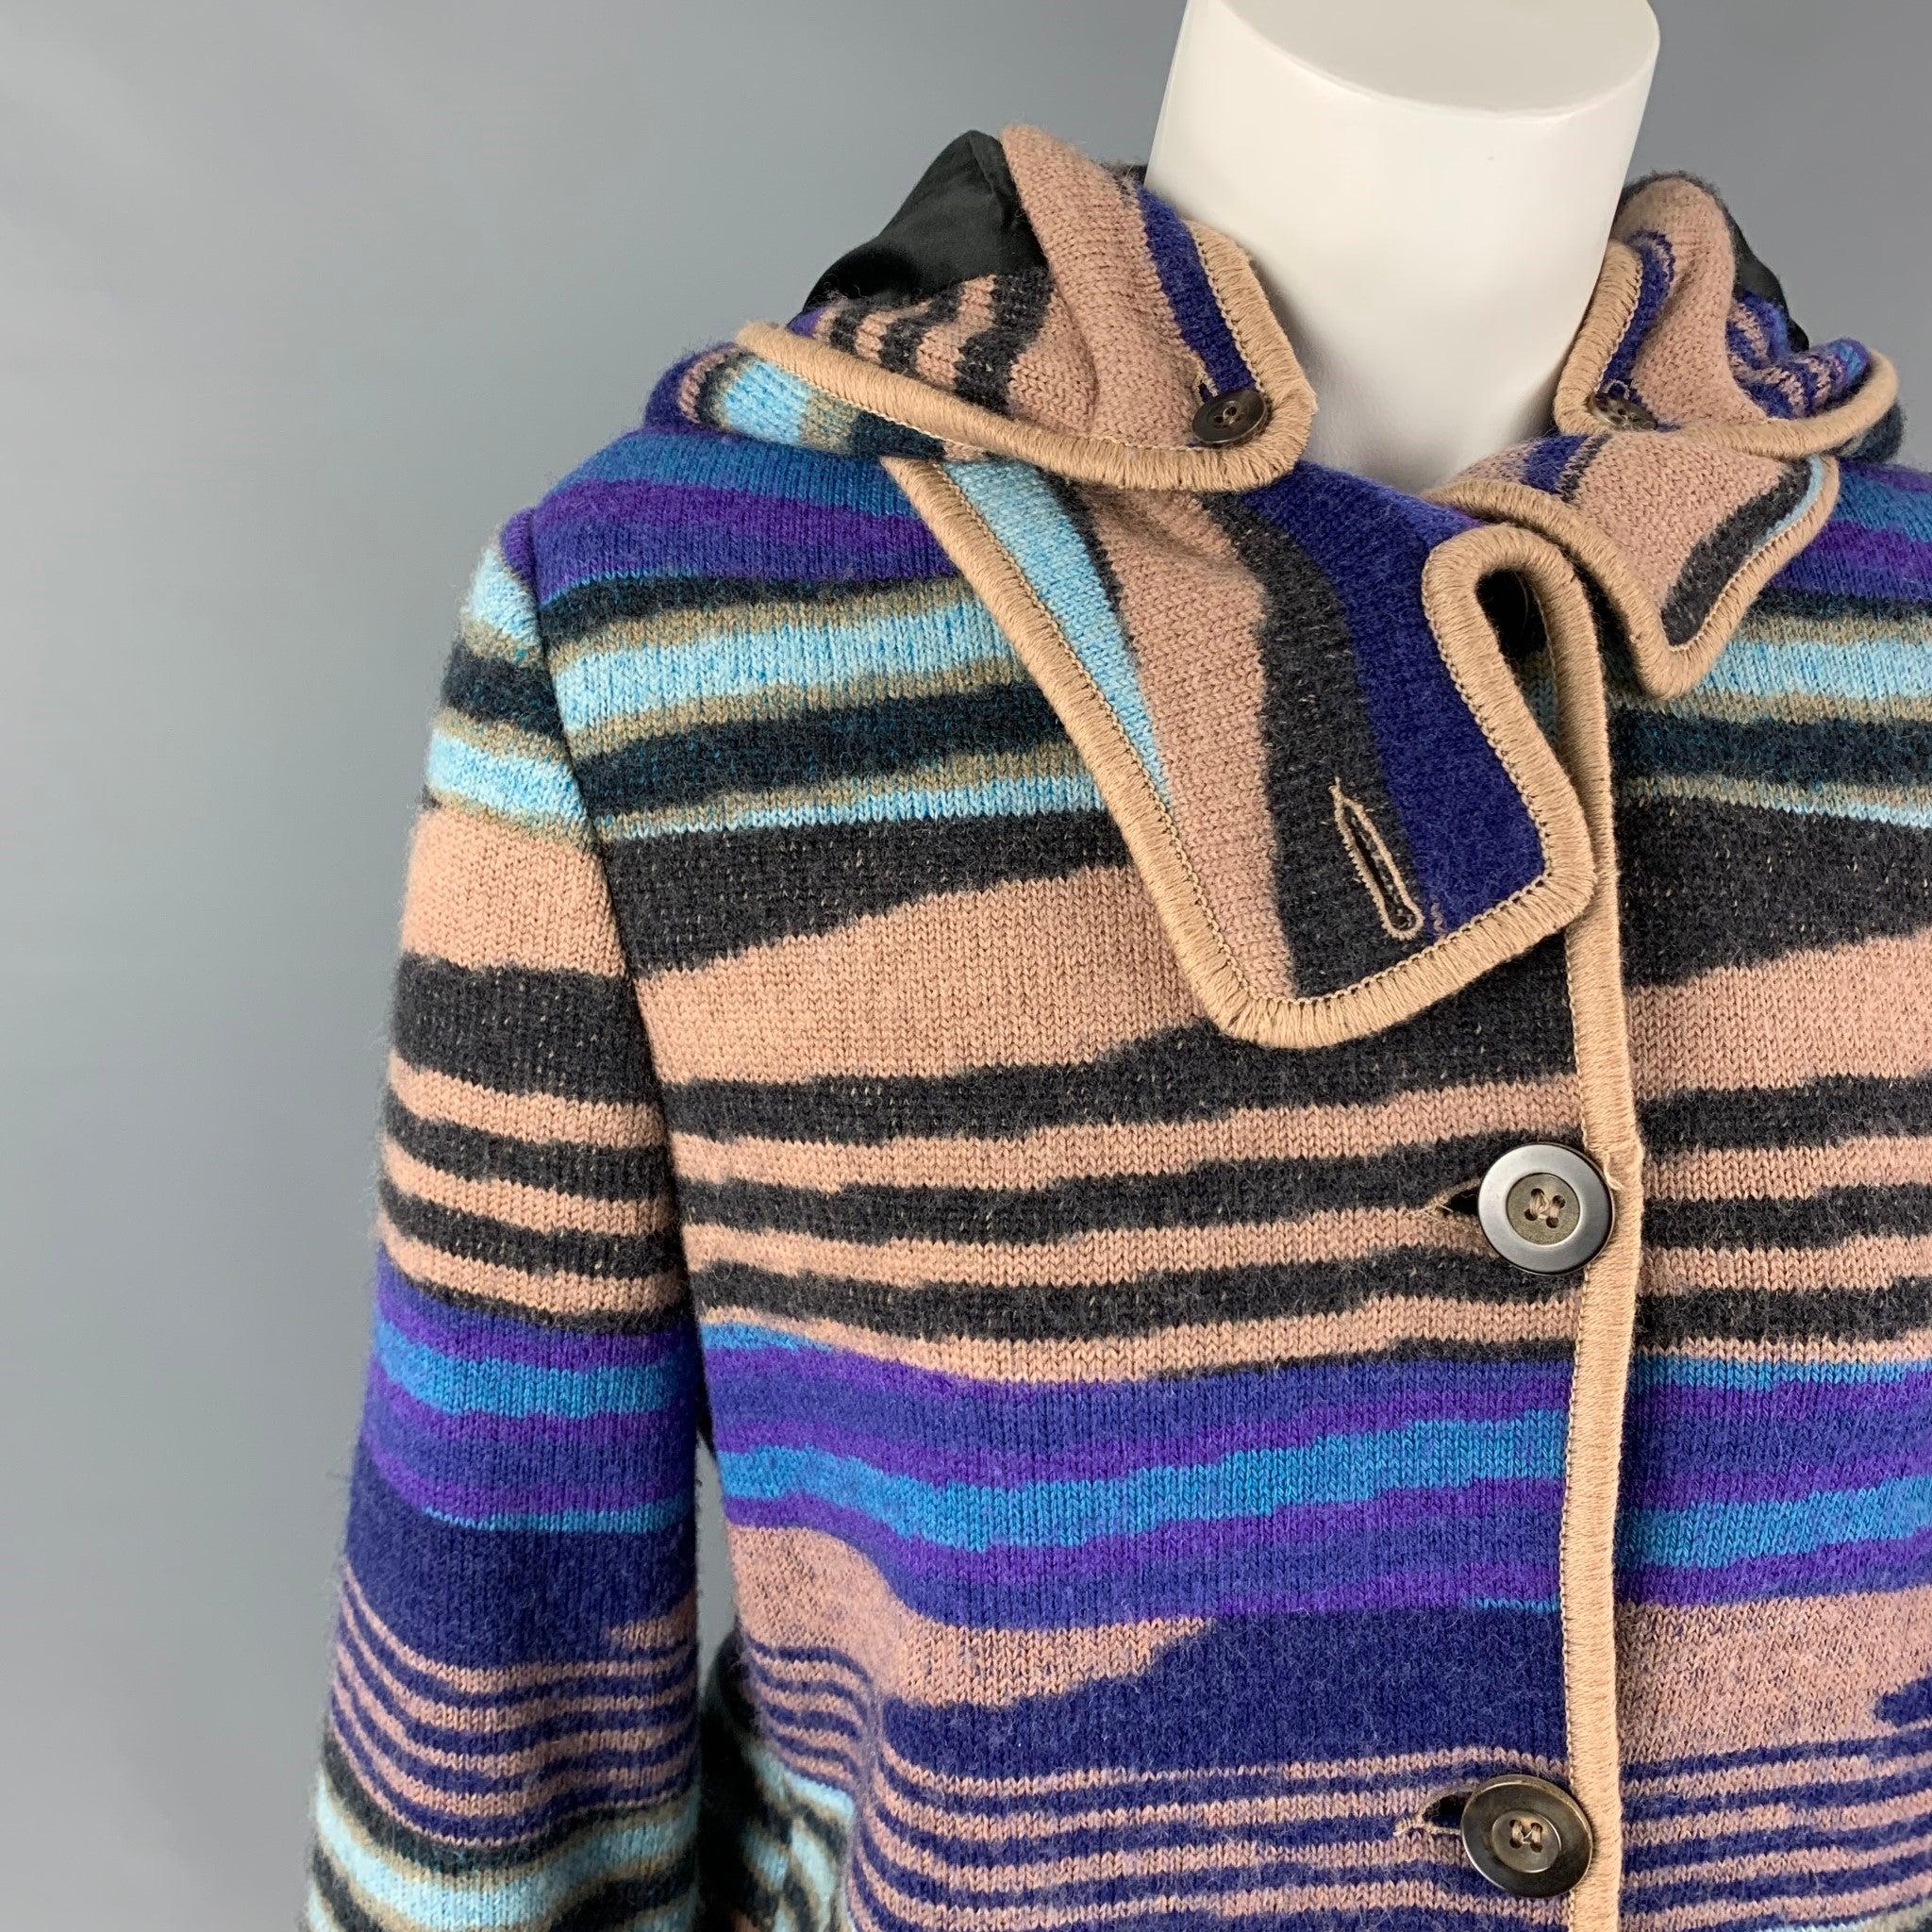 MISSONI coat comes in a multi-color knitted wool featuring a detachable hood, slit pockets, and a buttoned closure. Made in Italy.
Excellent
Pre-Owned Condition. 

Marked:  40 

Measurements: 
 
Shoulder: 15 inches Bust: 35 inches Sleeve: 25 inches